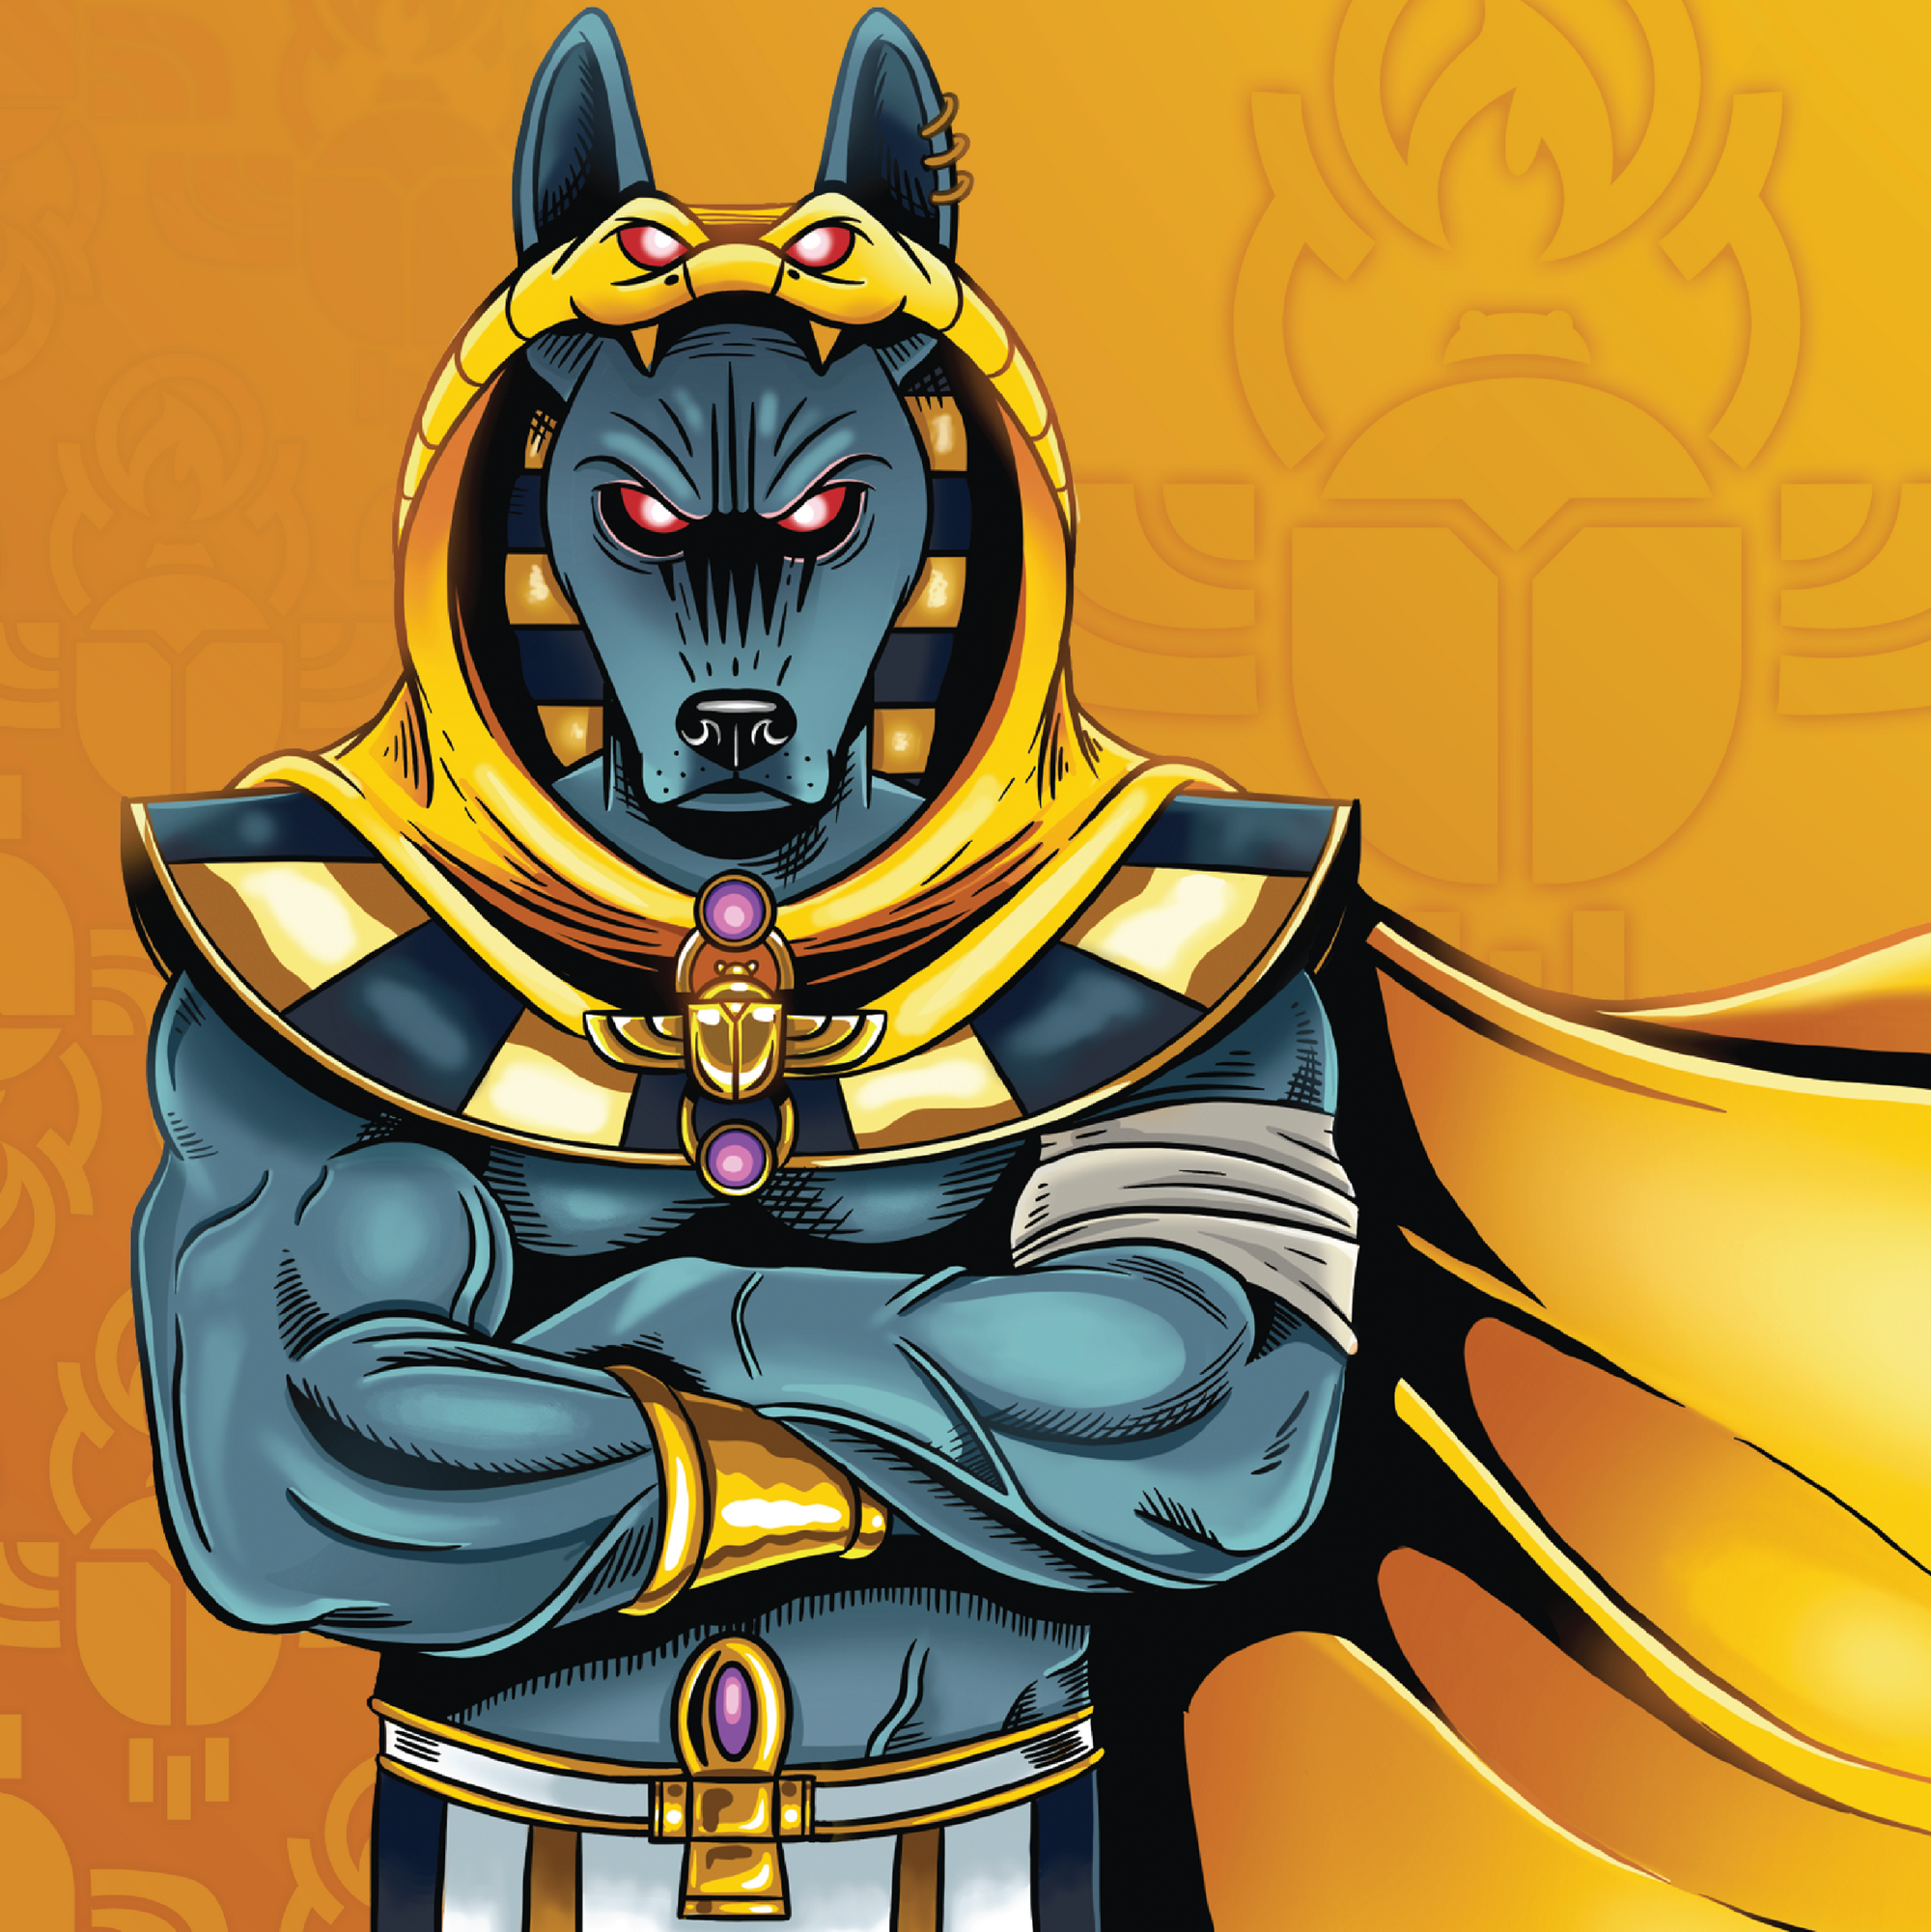 Comic style drawing of mythological character, Anubis, action figure with Egyptian style clothing and a goldenrod yellow jackal hat.